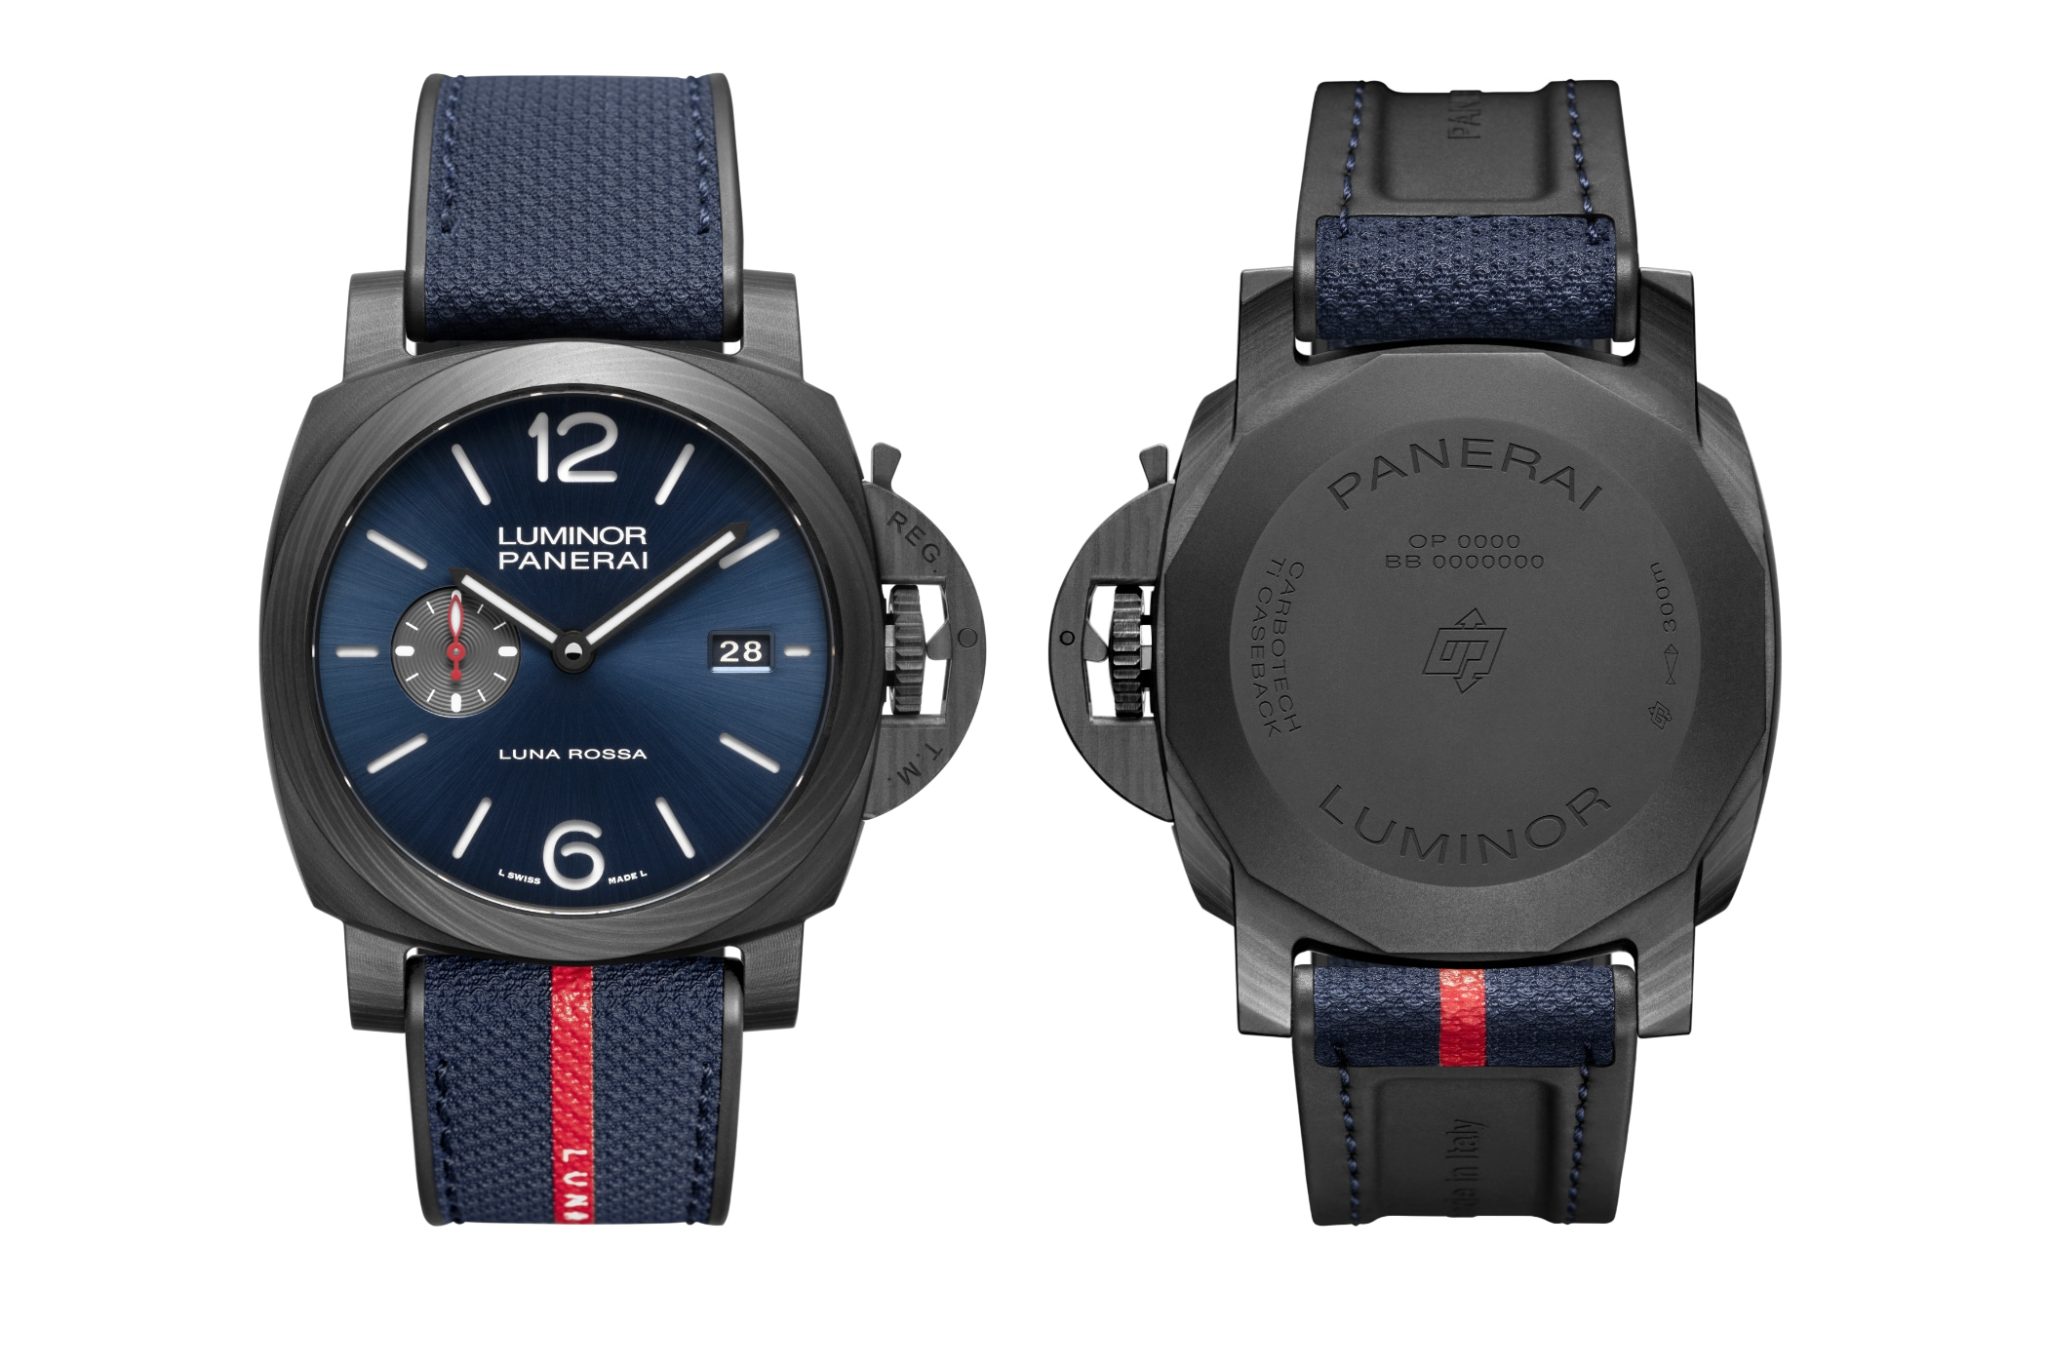 Panerai-Luminor-Luna-Rossa-Carbotech-PAM01529-Day-Night-Lume-Front-Back-Side-By-Side